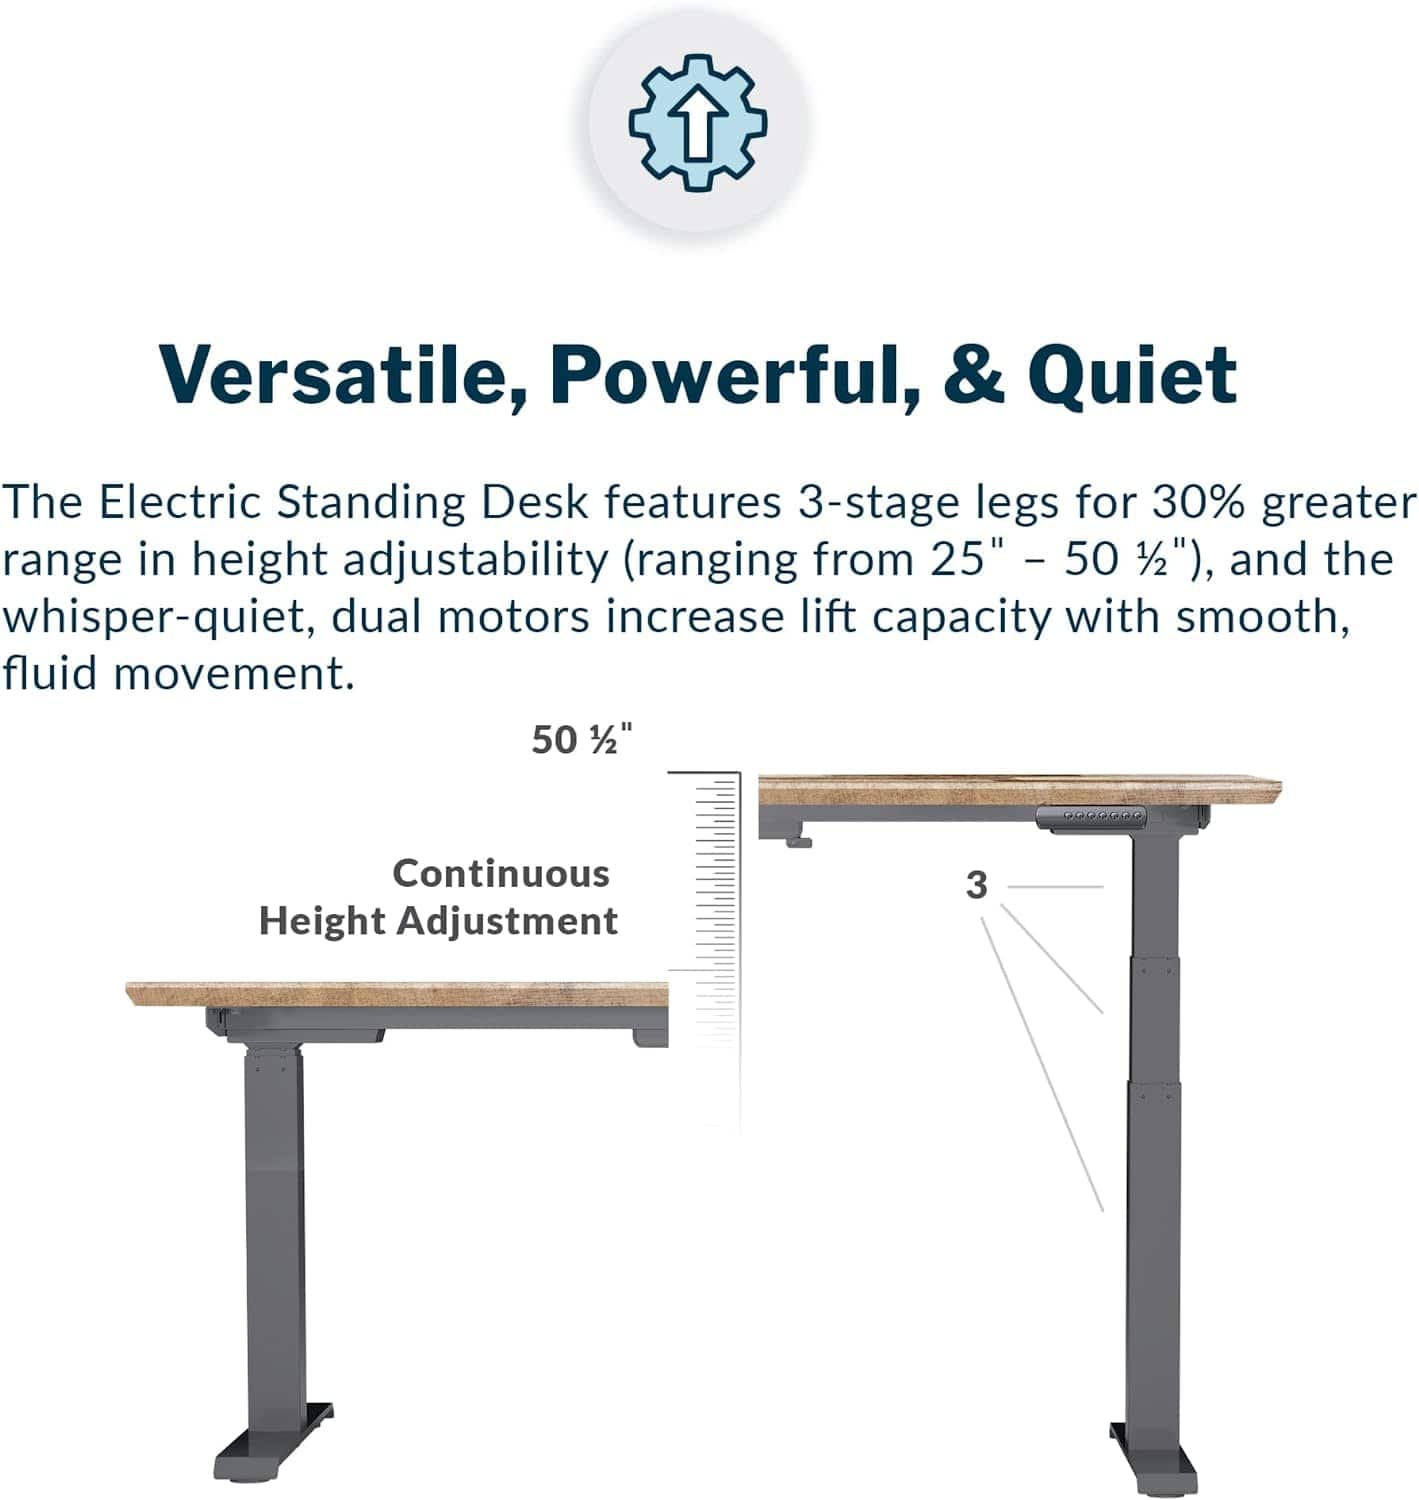 StandUp Desk Depot Reclaimed Wood / 60" x 24" Electric Standing Desk 60" X 24" (desk) - Sit to Stand Raising Desk for Office or Home - Program 4 Height Settings - Powerful Dual Motor Adjustable Desk W/Sturdy Steel Legs (Reclaimed Wood)